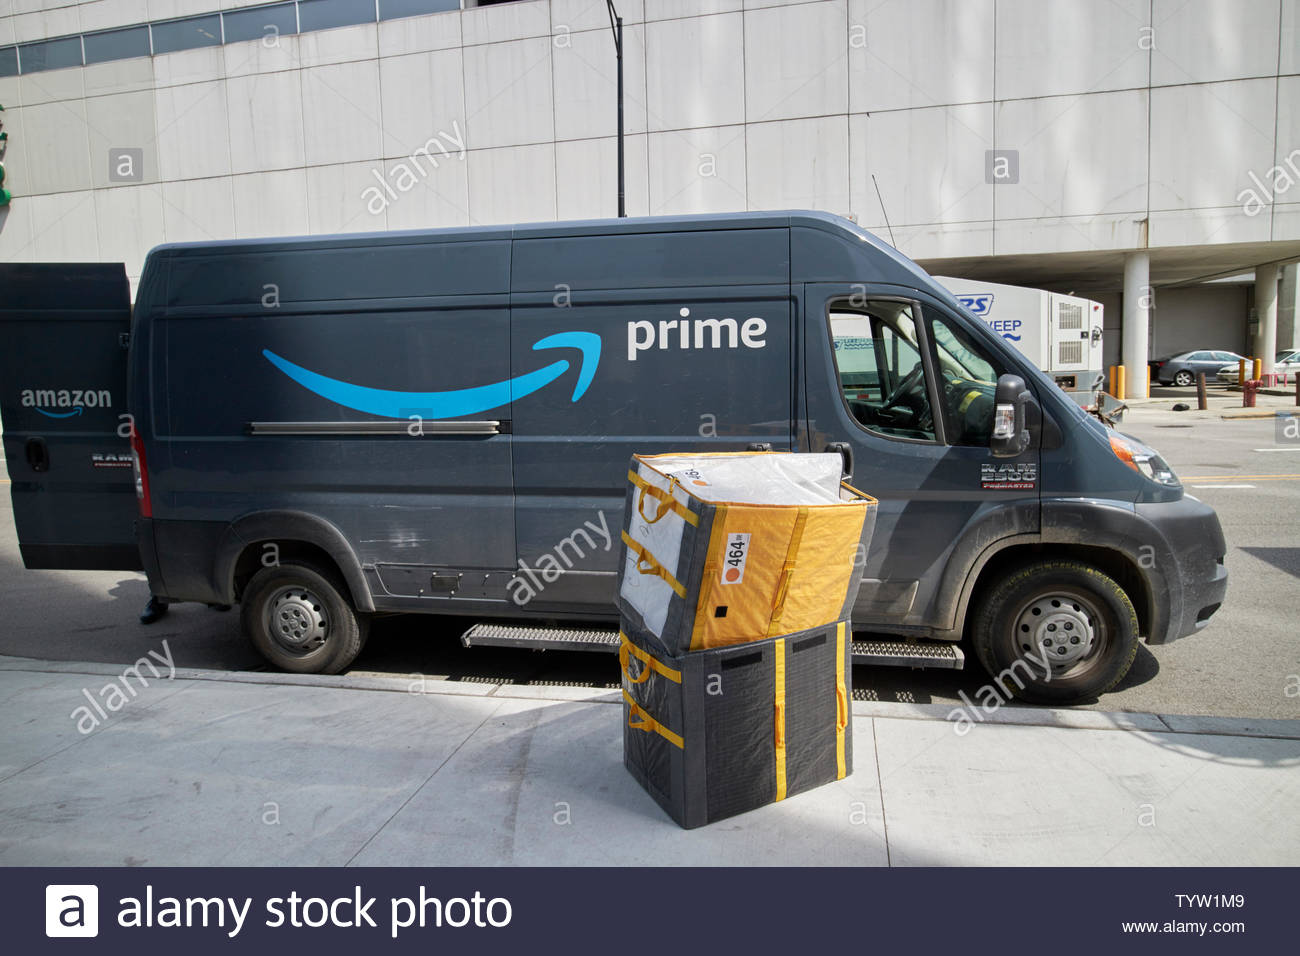 amazon-prime-delivery-van-in-downtown-chicago-il-usa-TYW1M9.jpg